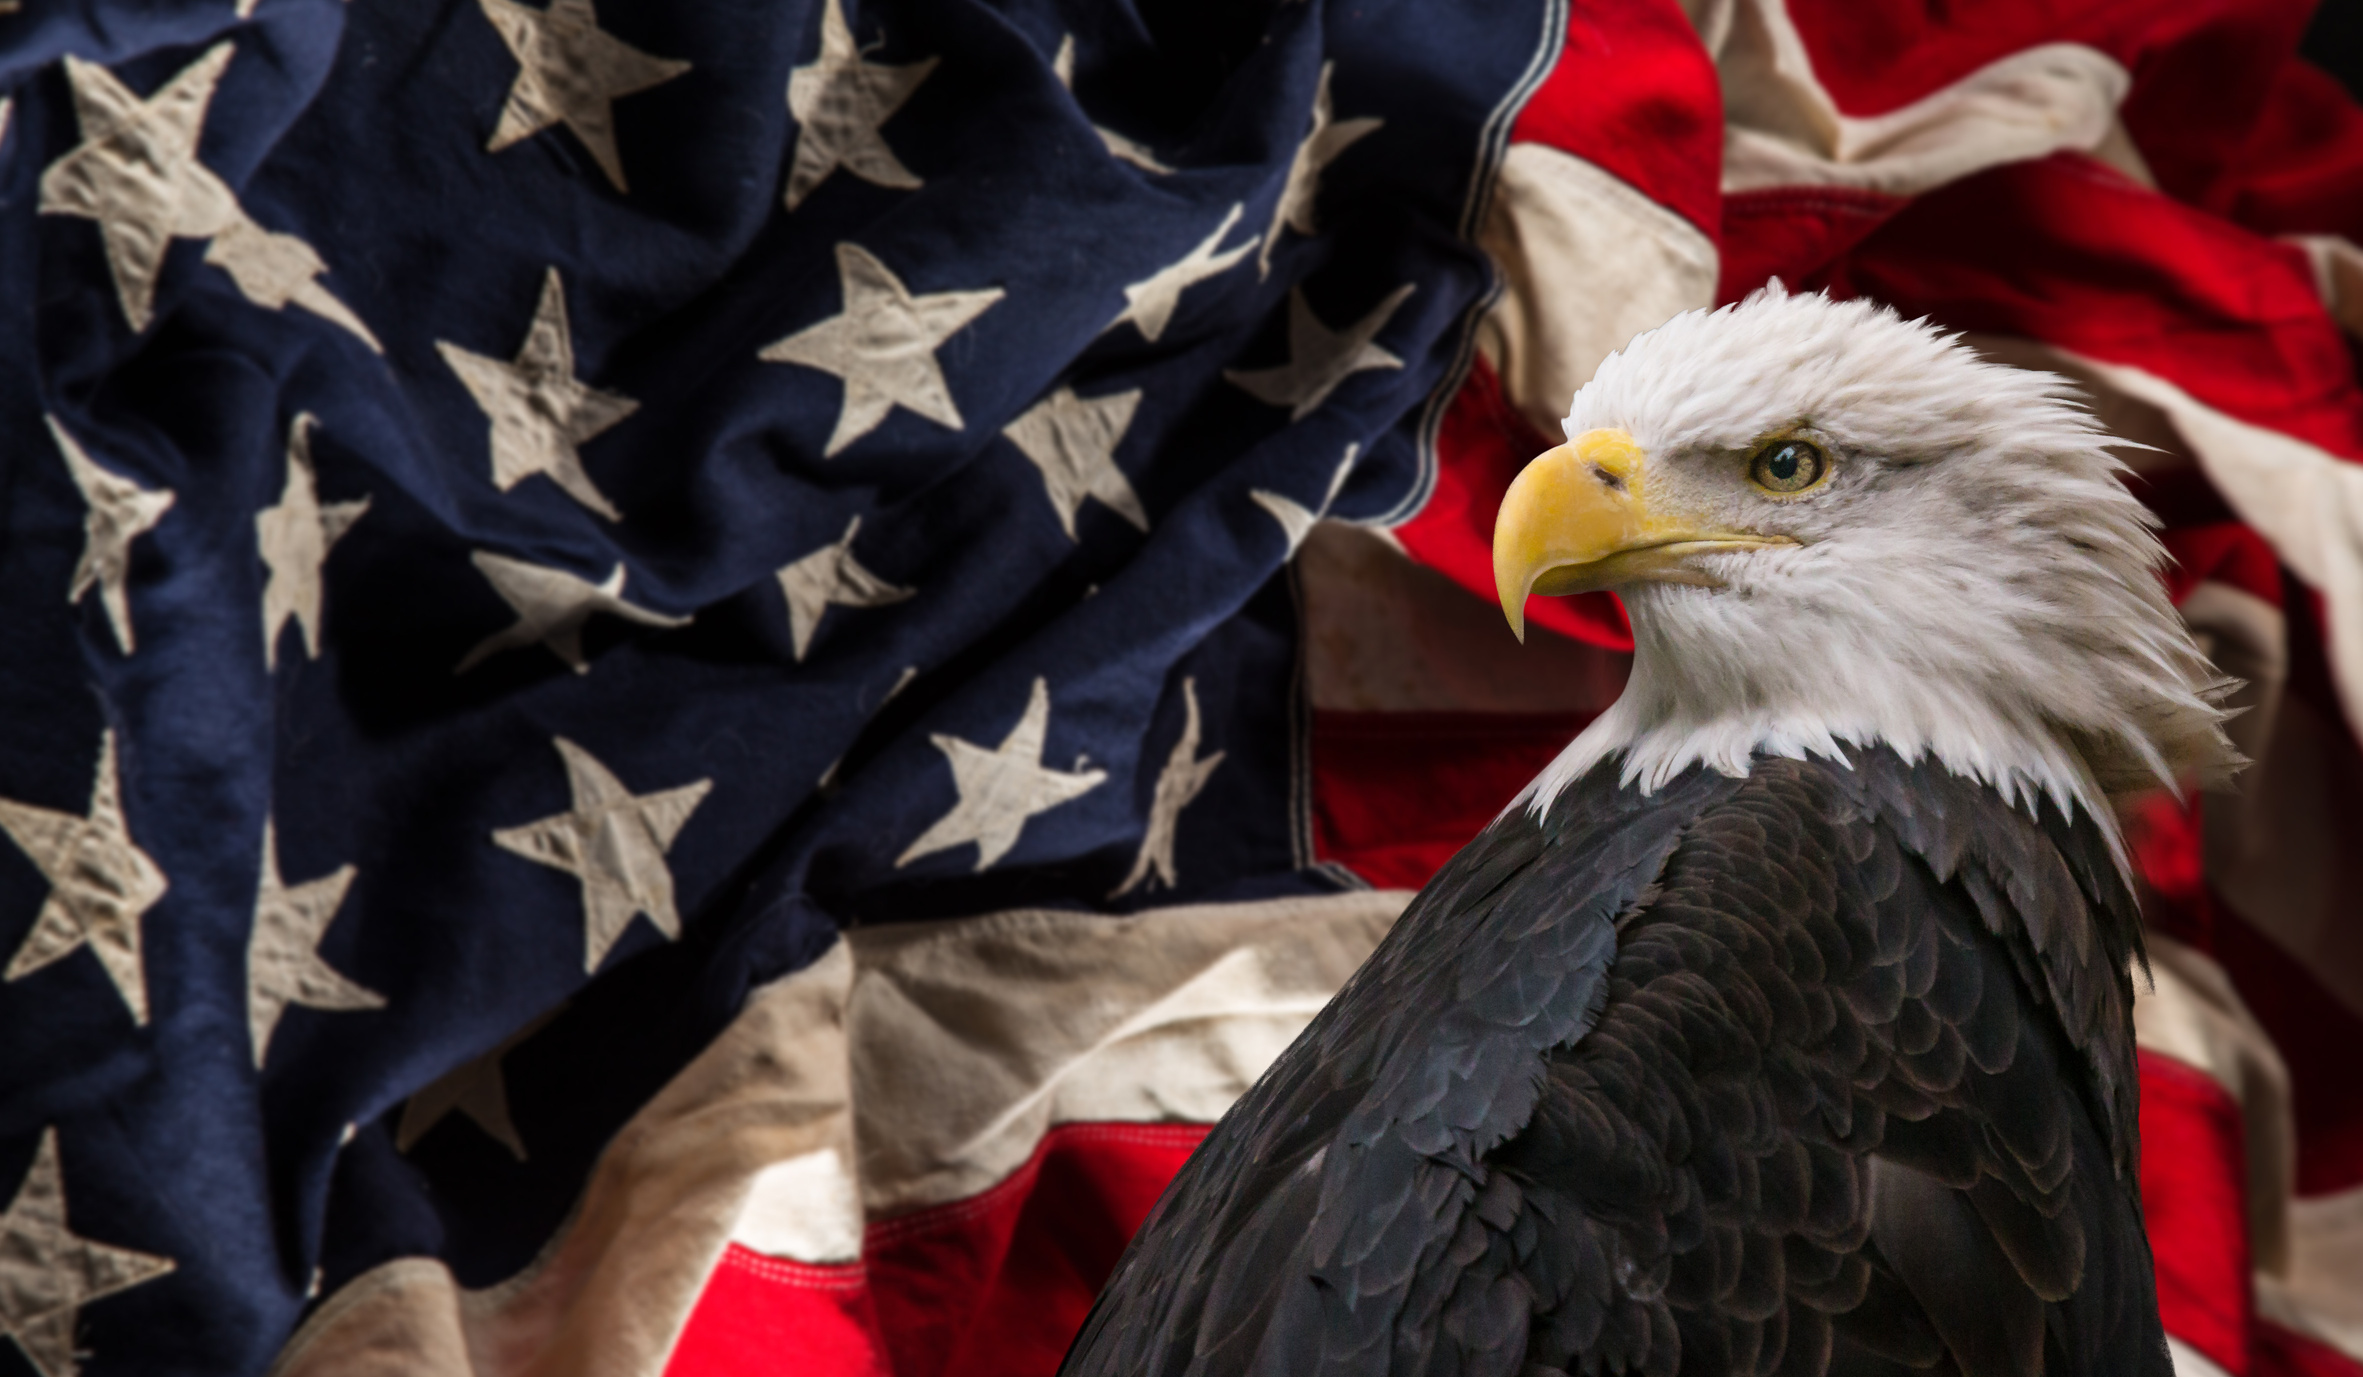 American Bald Eagle with Flag